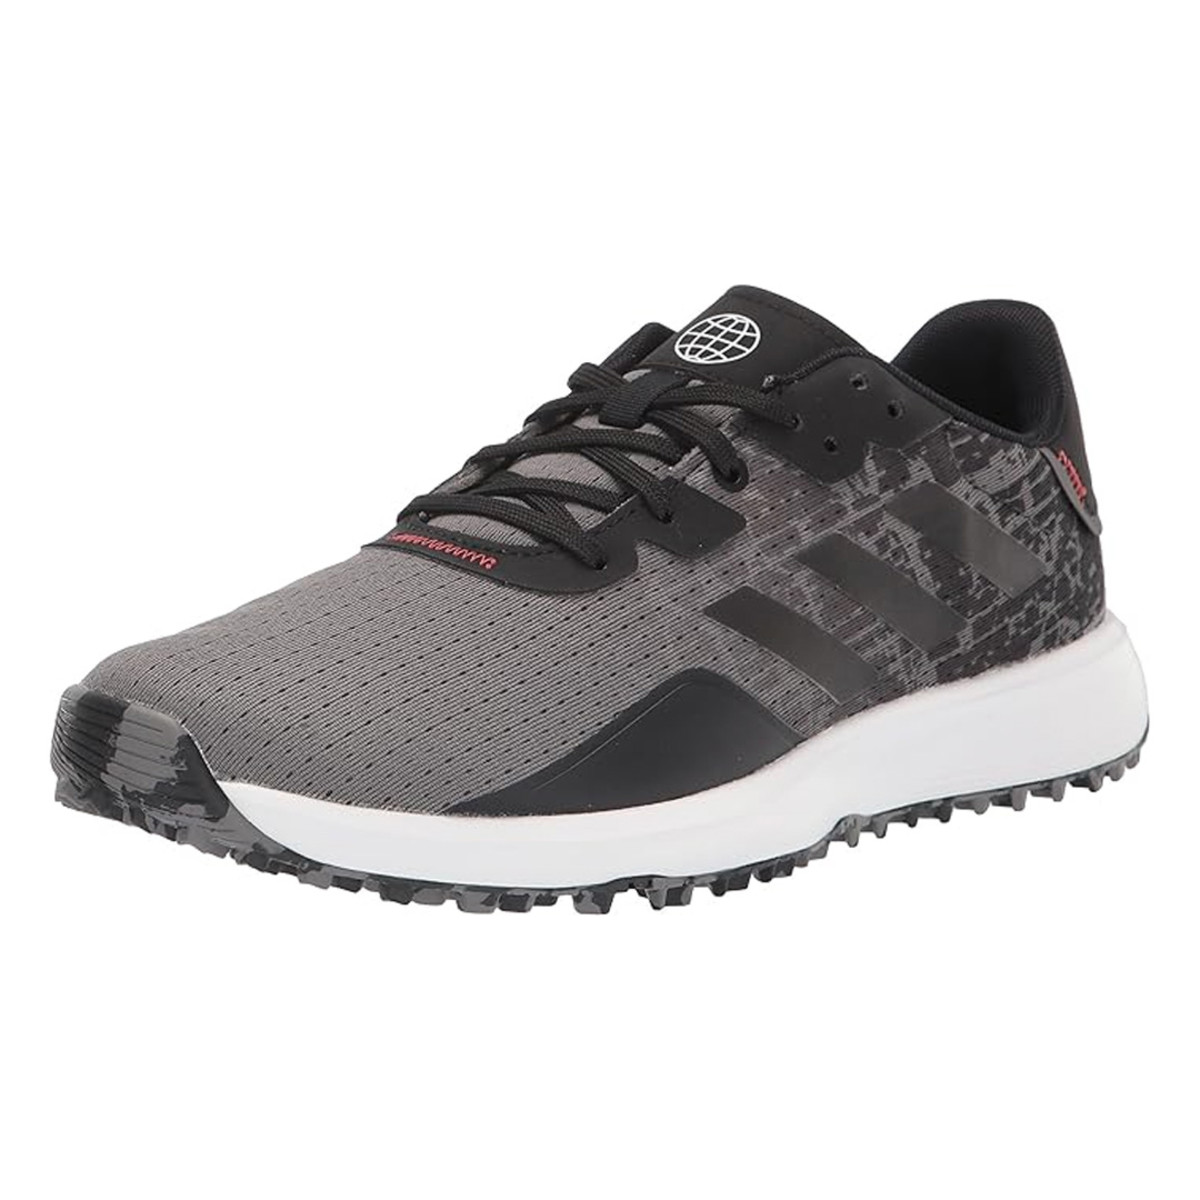 The Adidas S2G Spikeless 23 Golf Shoes in Gray Four are on sale right now at Amazon